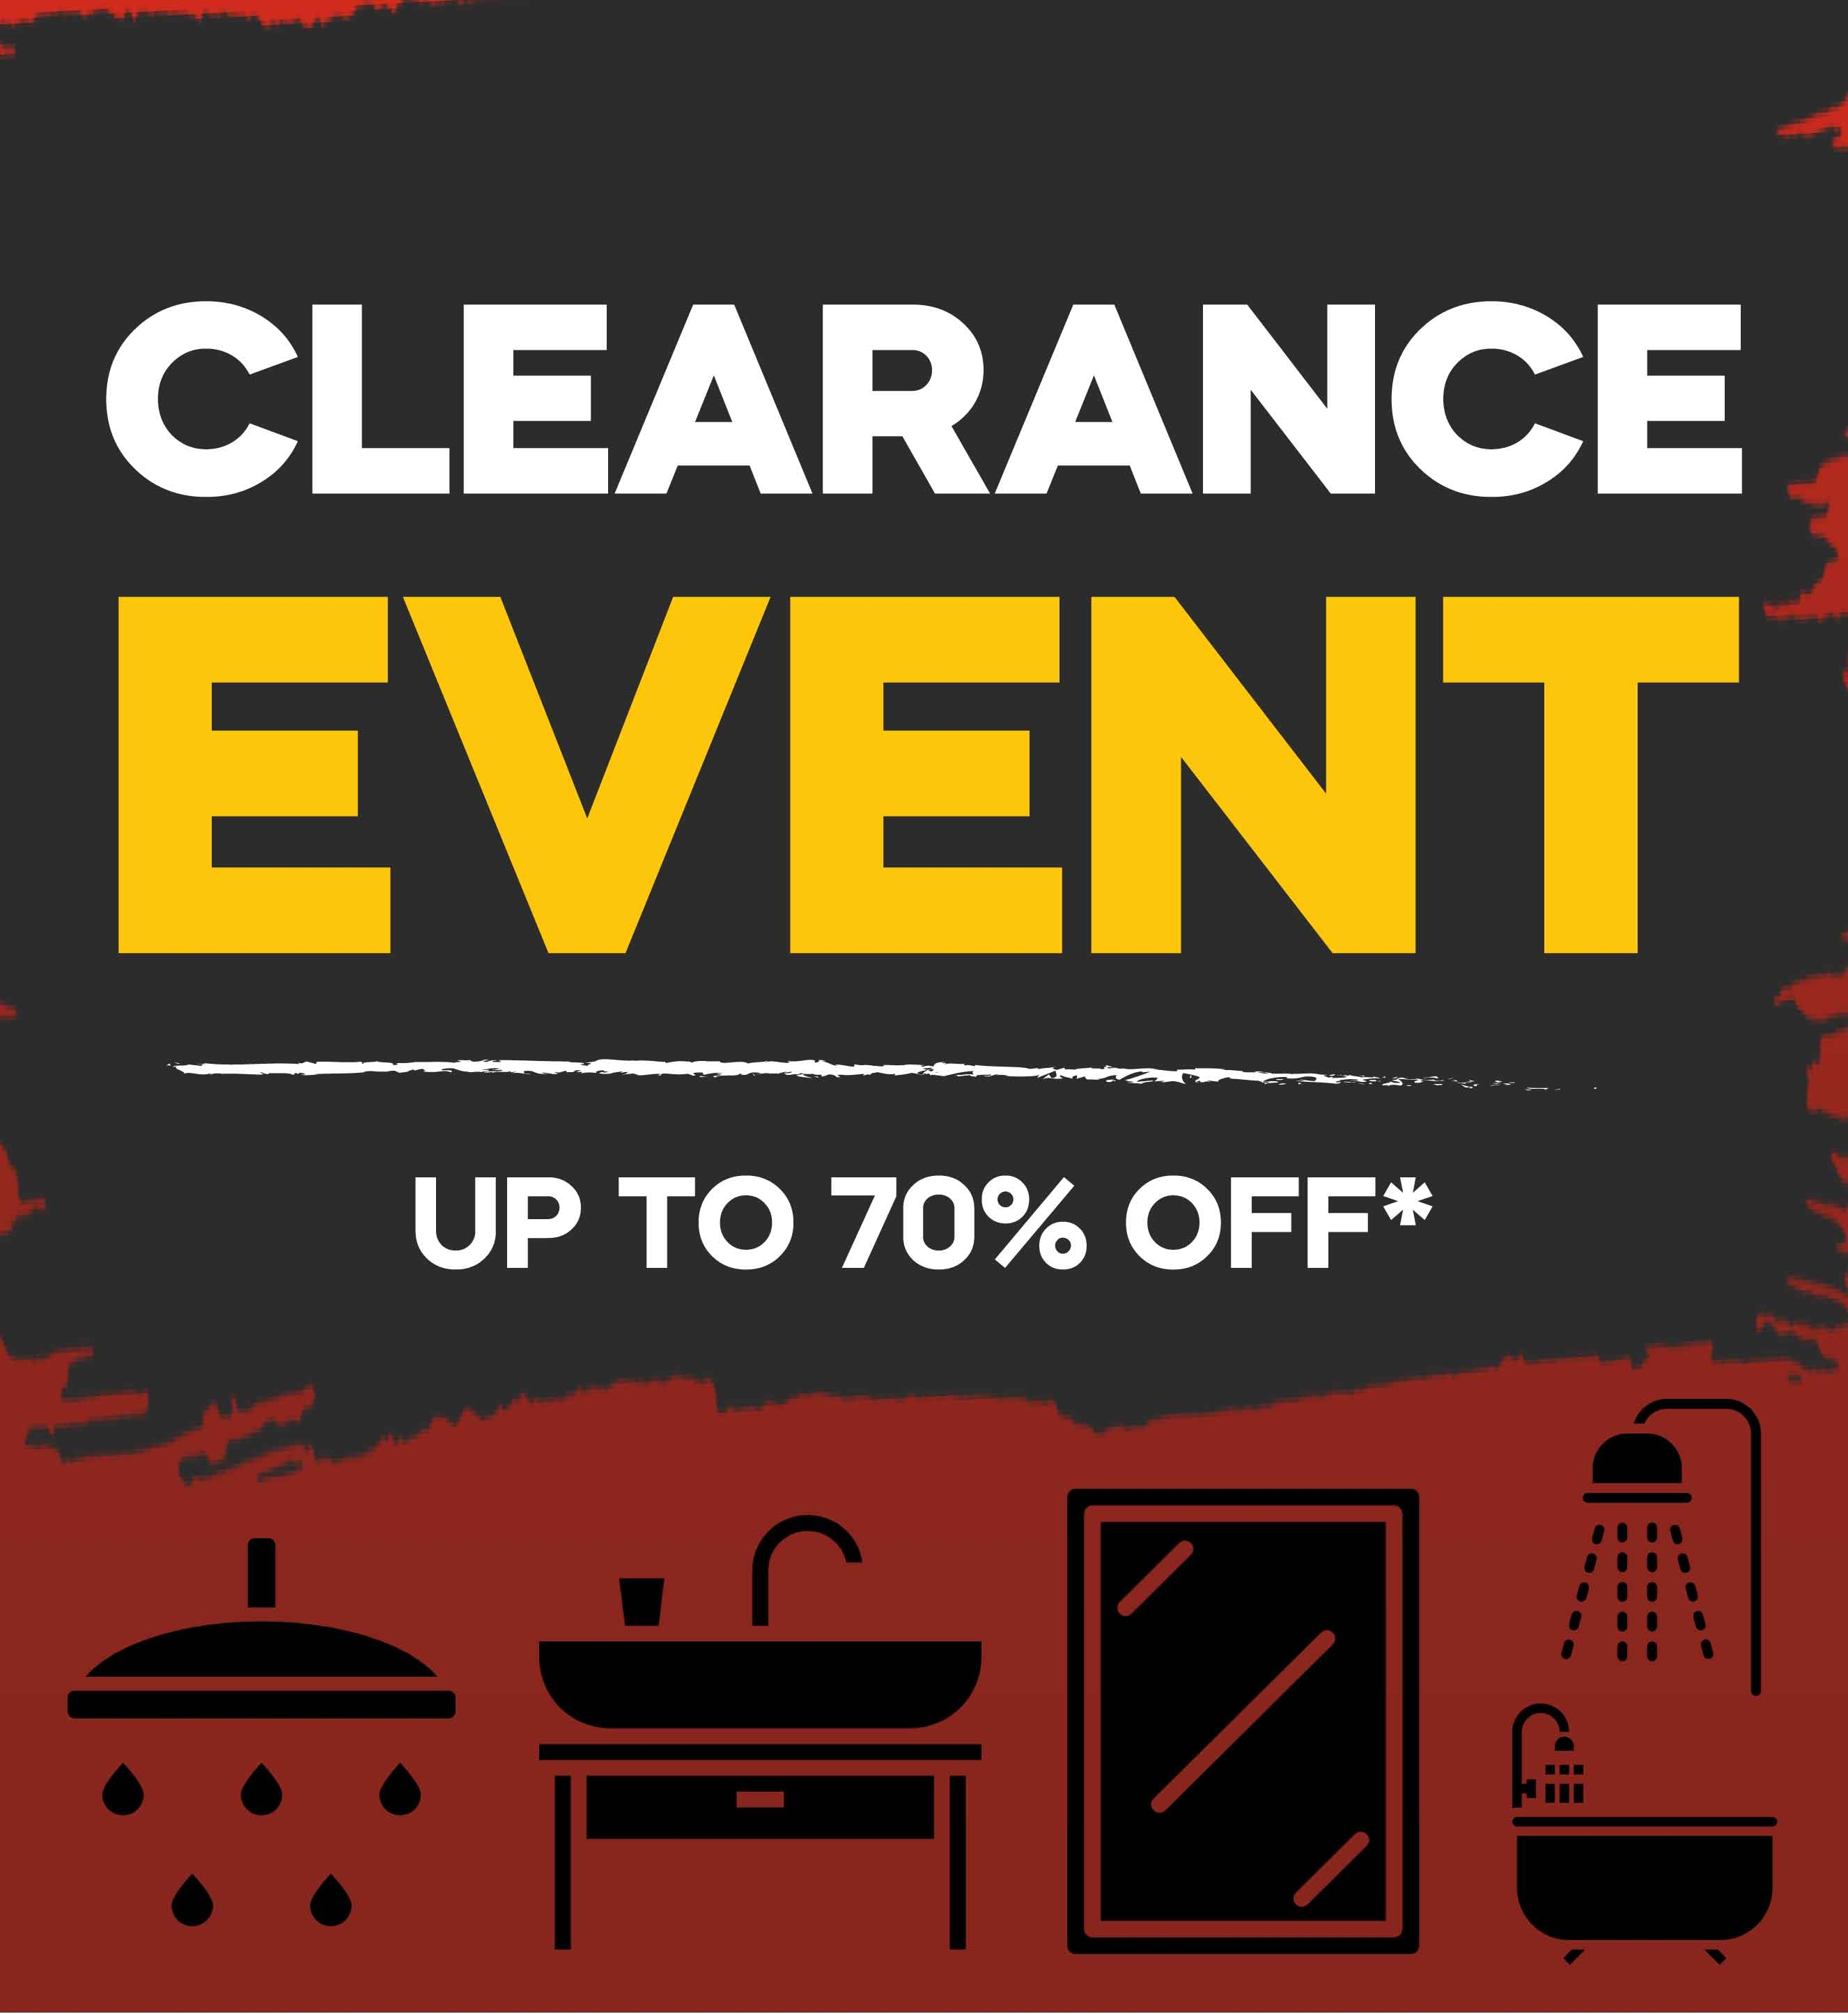 Clearance Event | Up to 70% OFF